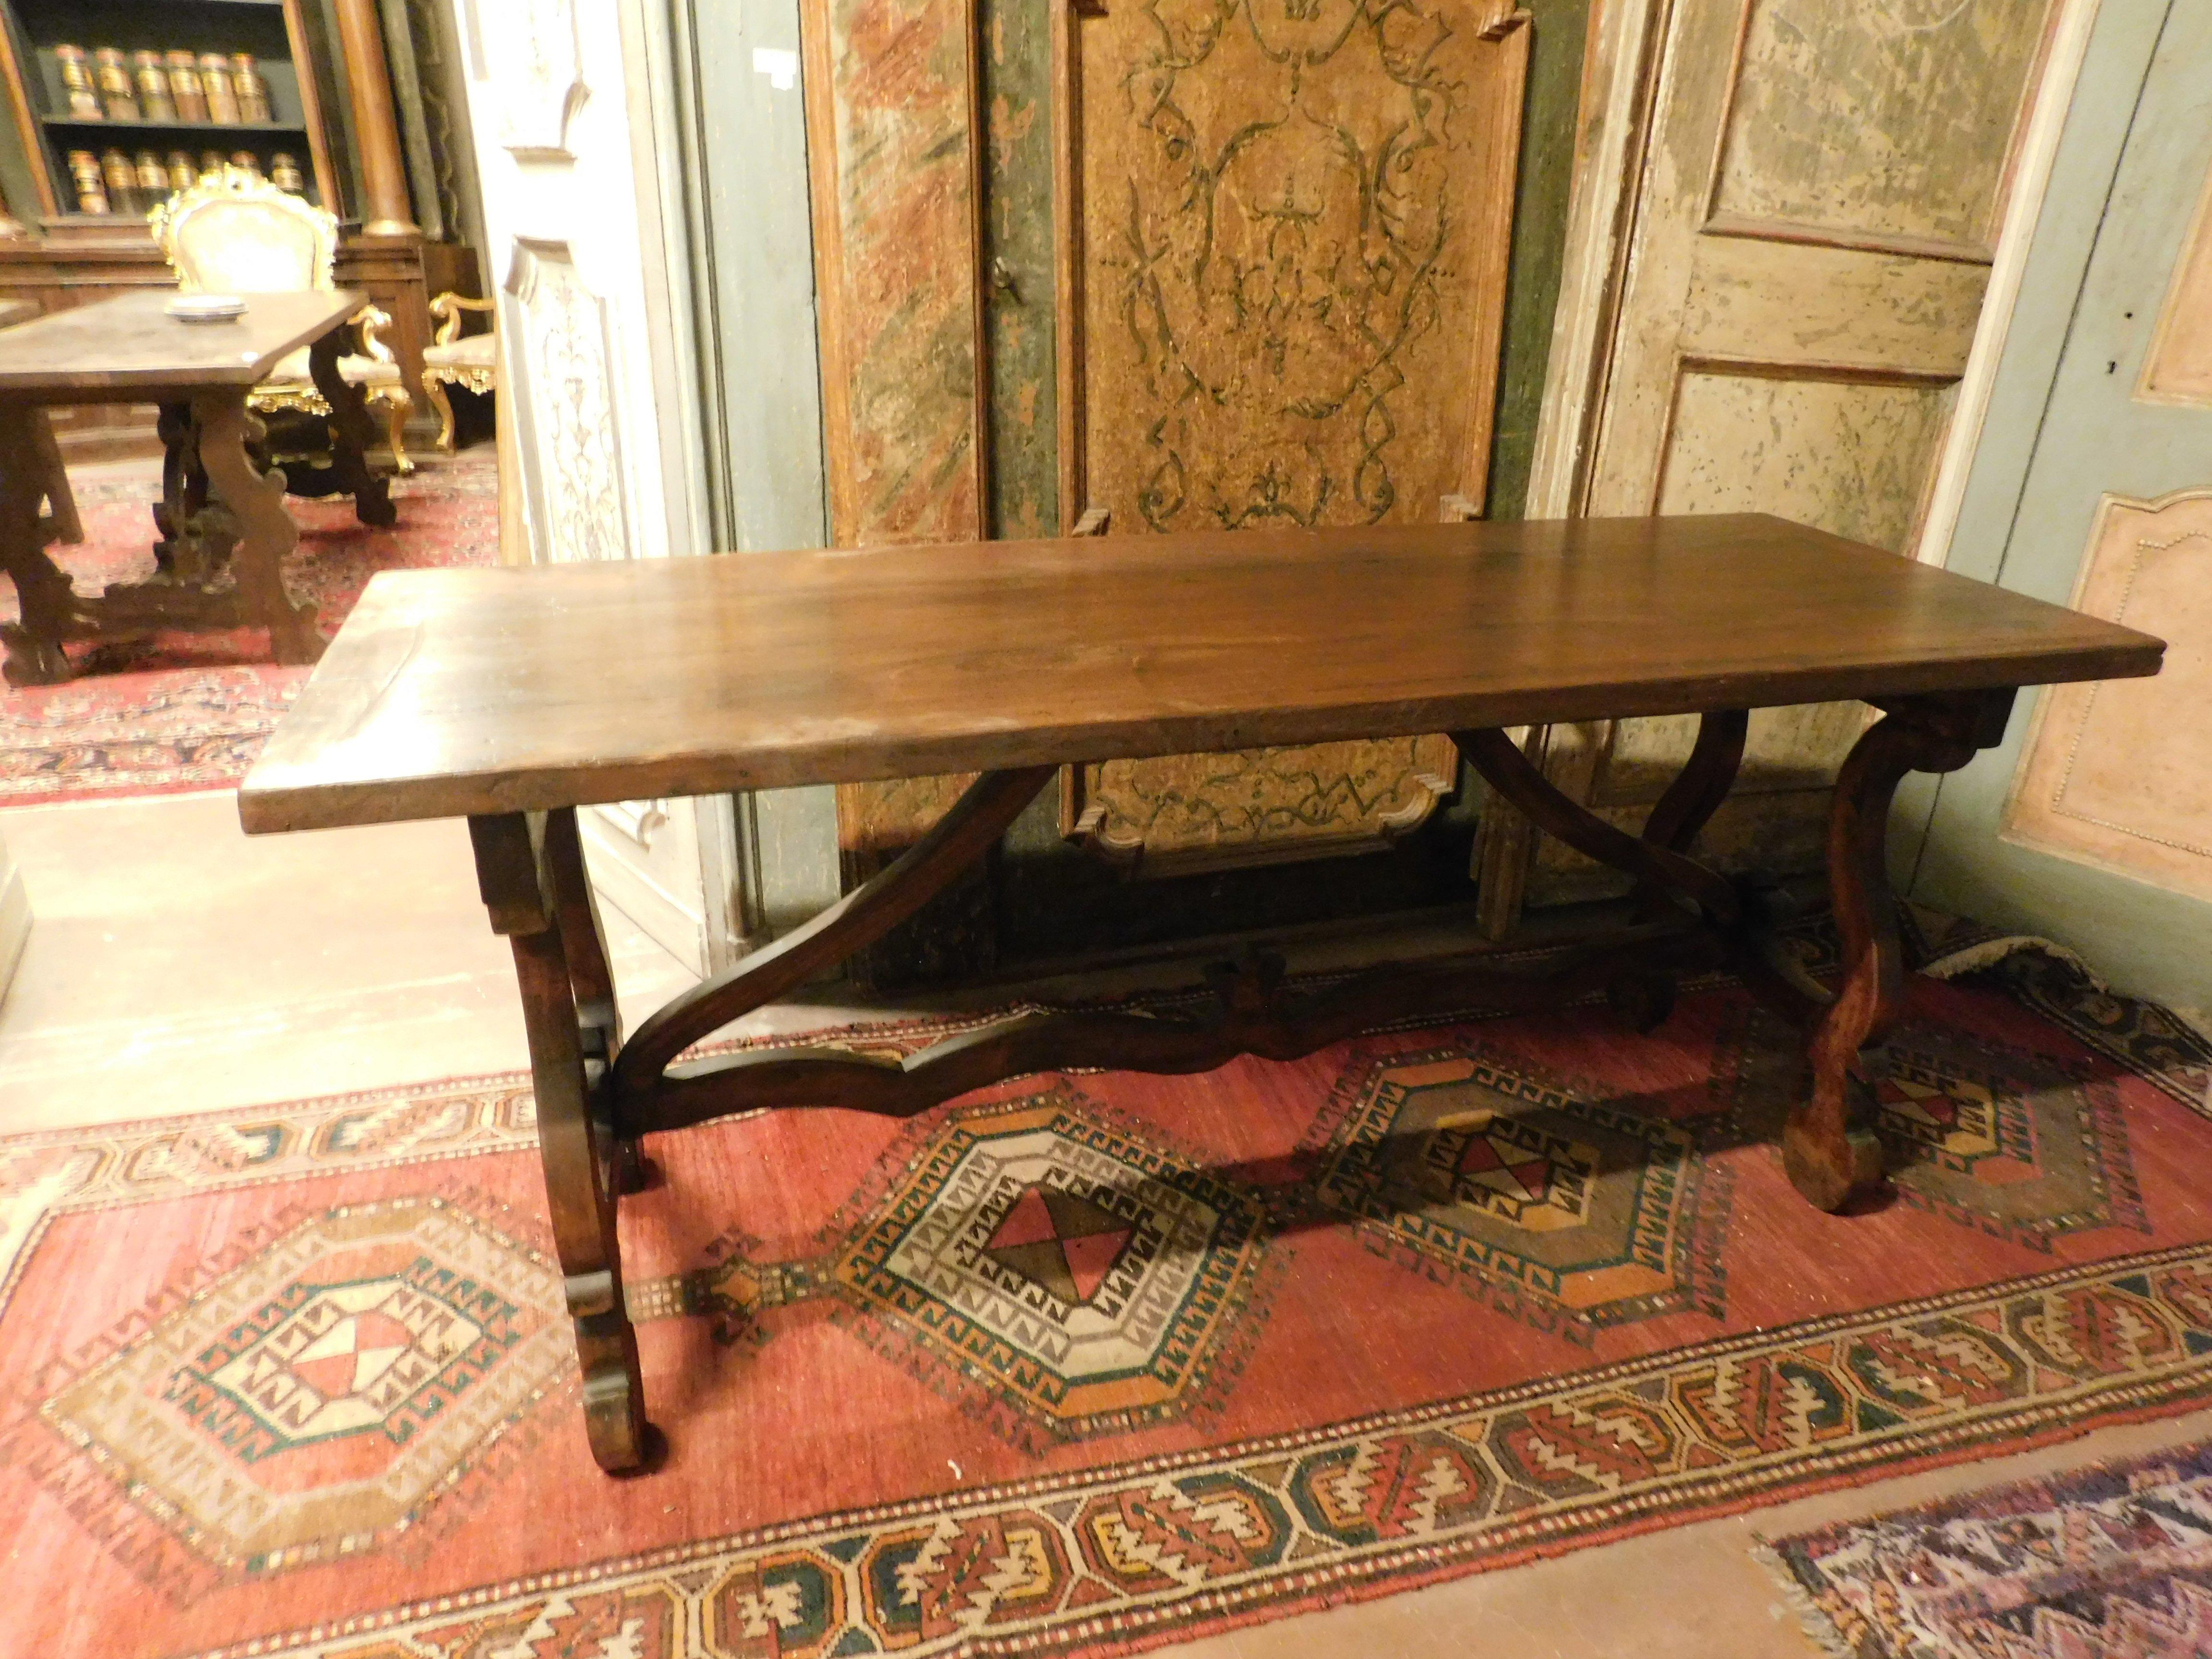 Old antique refectory table with wavy legs in solid wood, made of mixed oak and walnut wood, built in Spain, from the 19th century, suitable for a dining room or as an important office table, good dimensions, ideal with modern contrasting chairs of